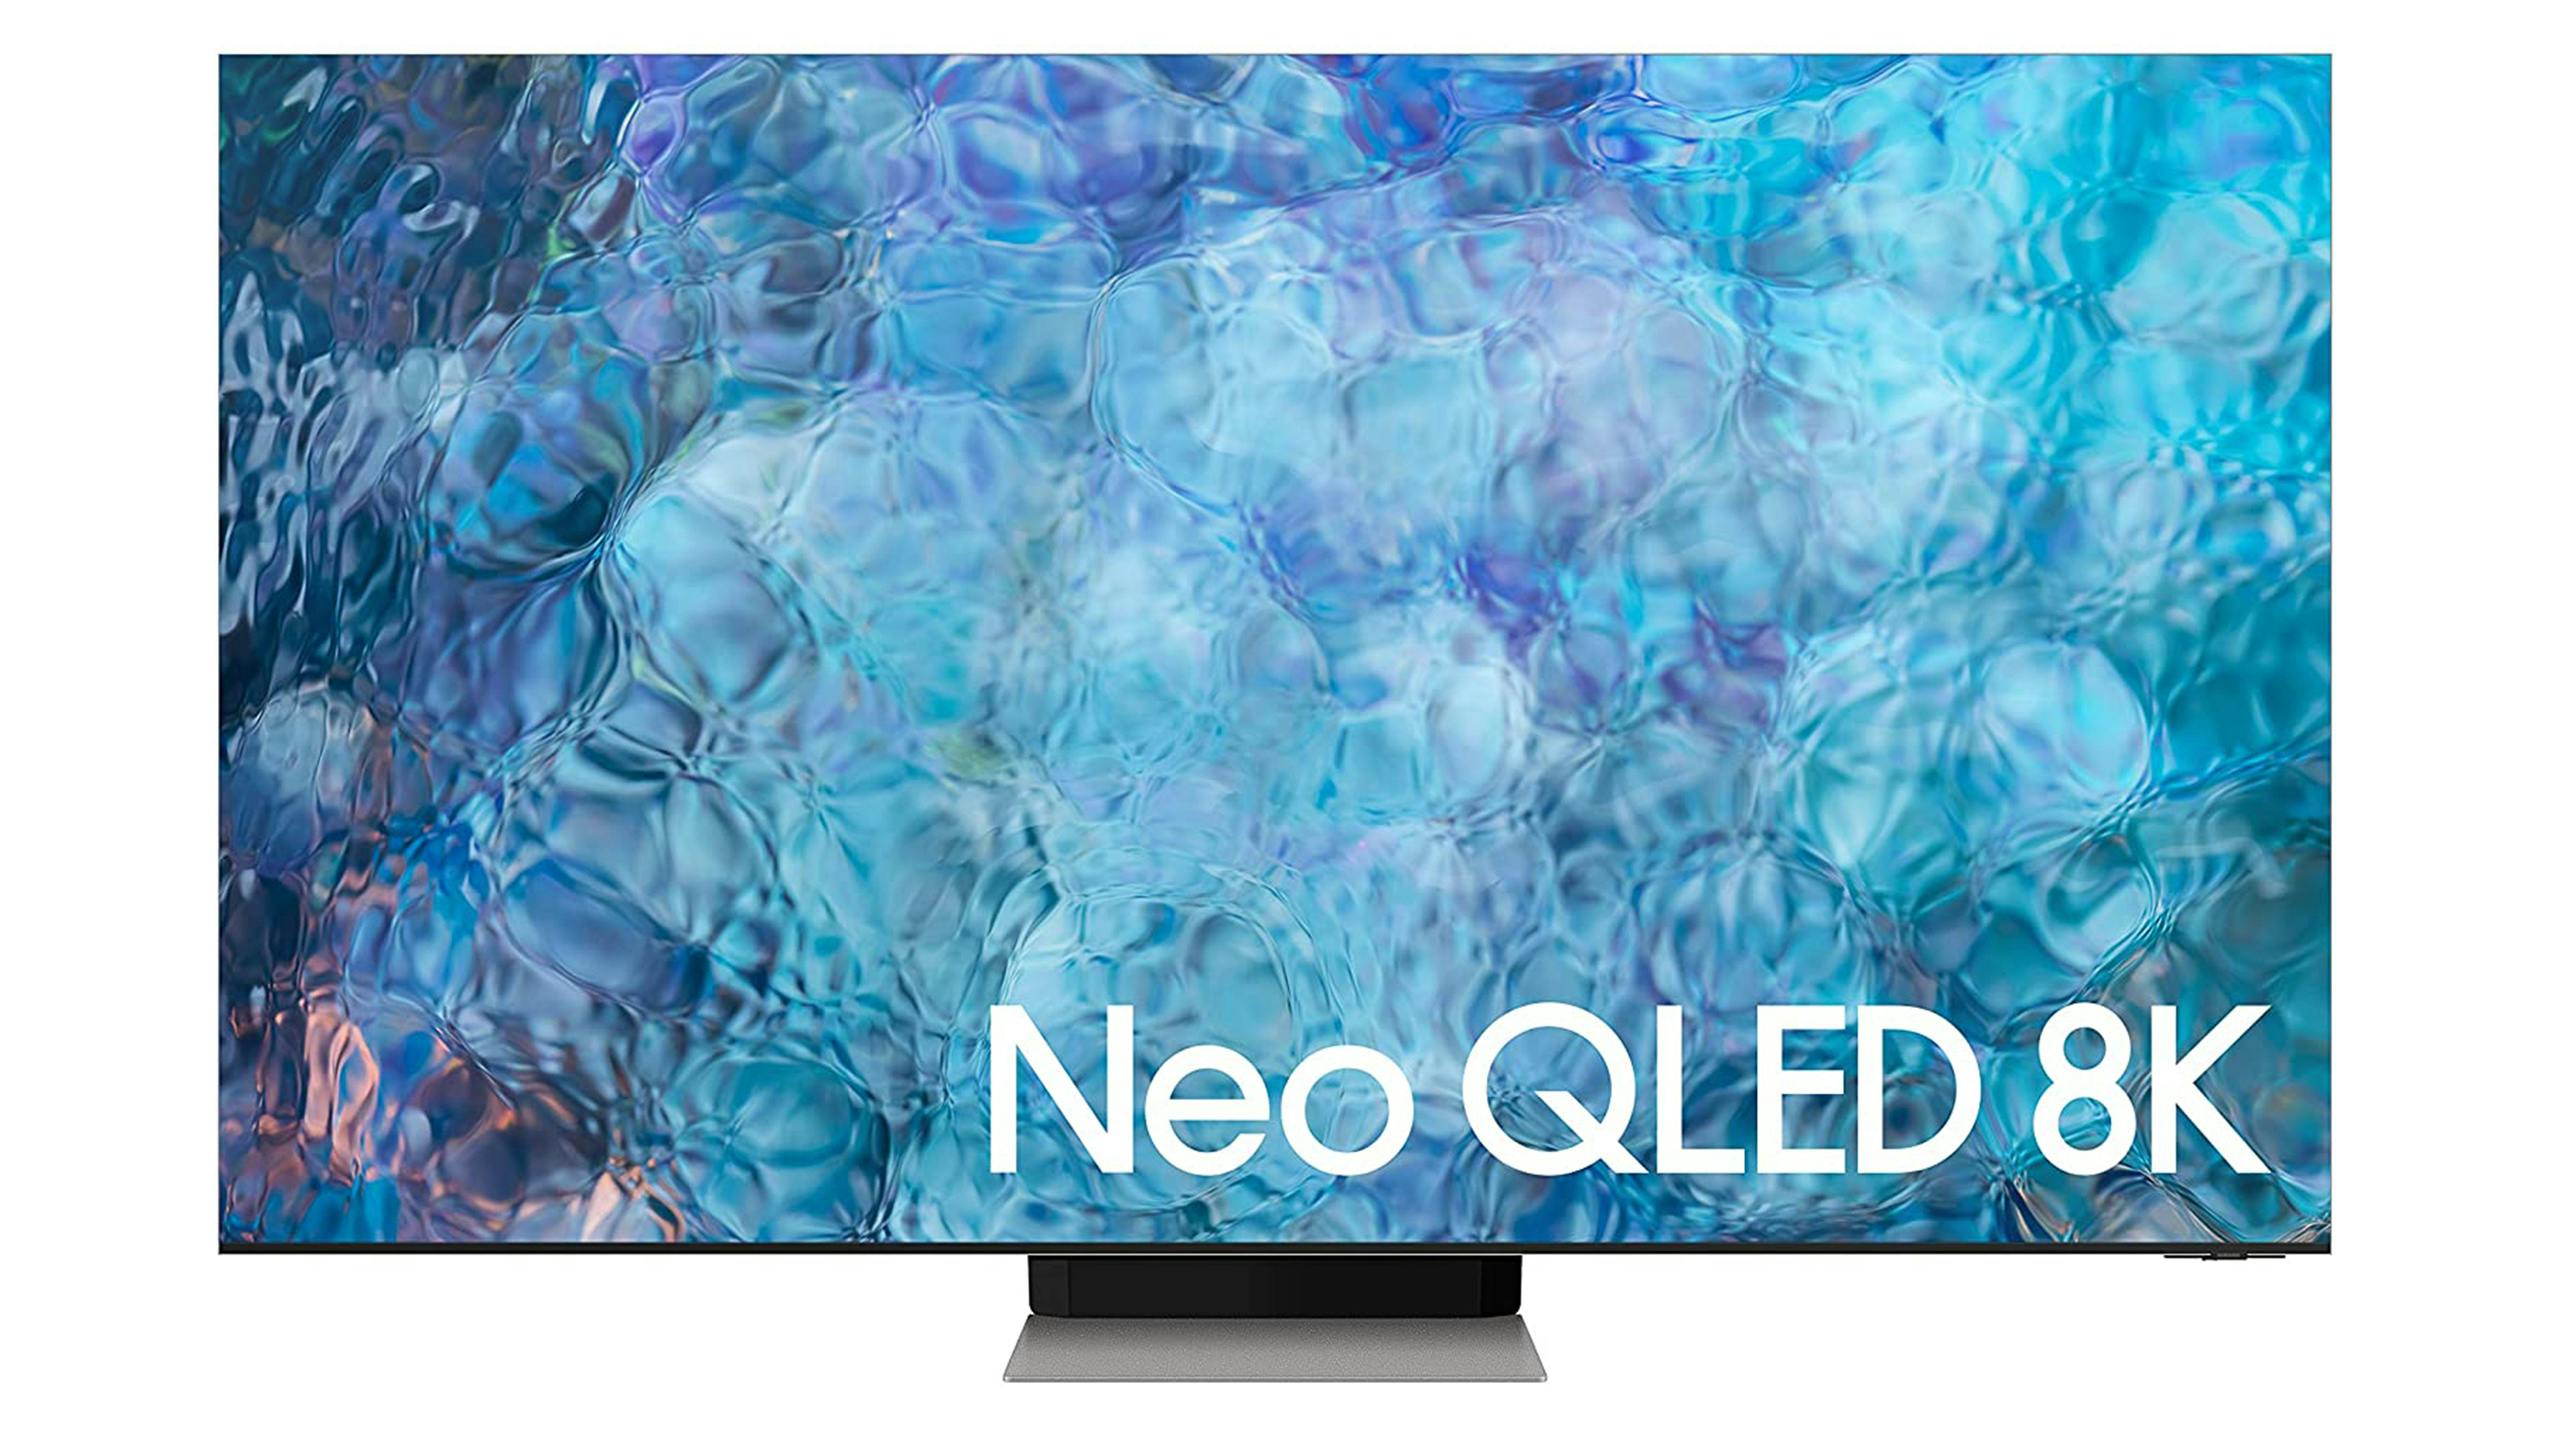 Samsung Neo QLED 8K front facing product image.